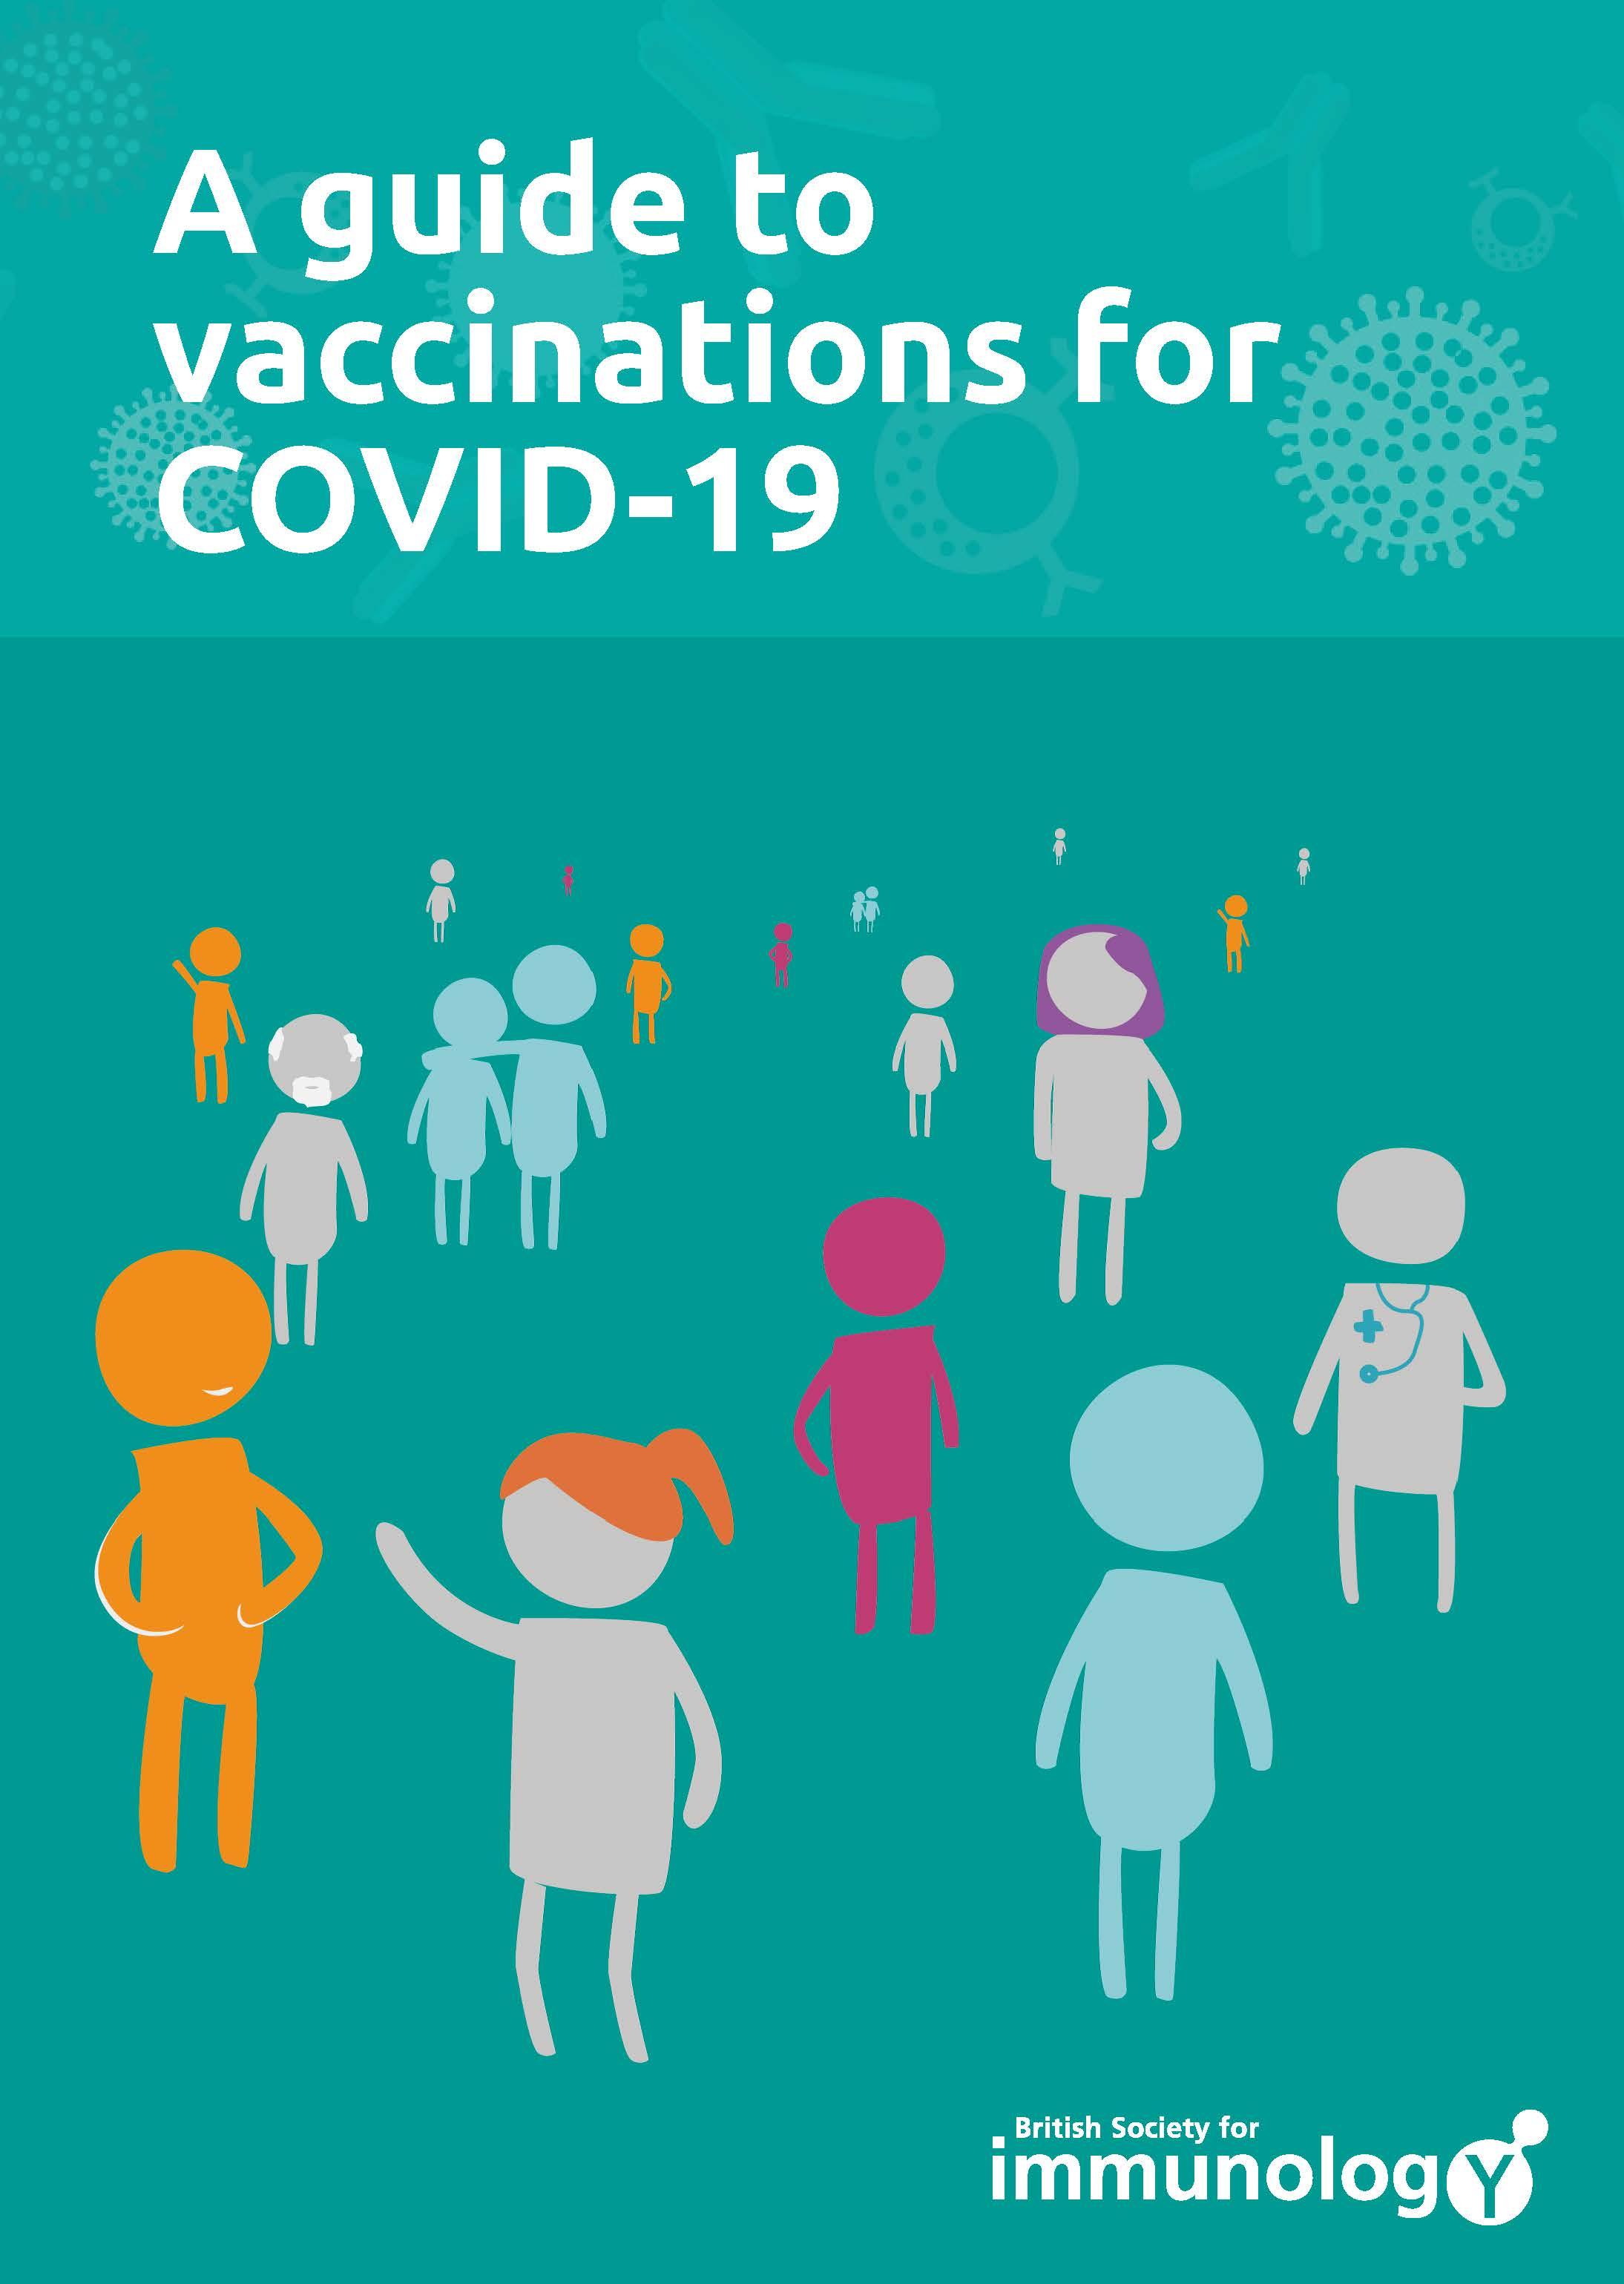 A guide to vaccinations for COVID19